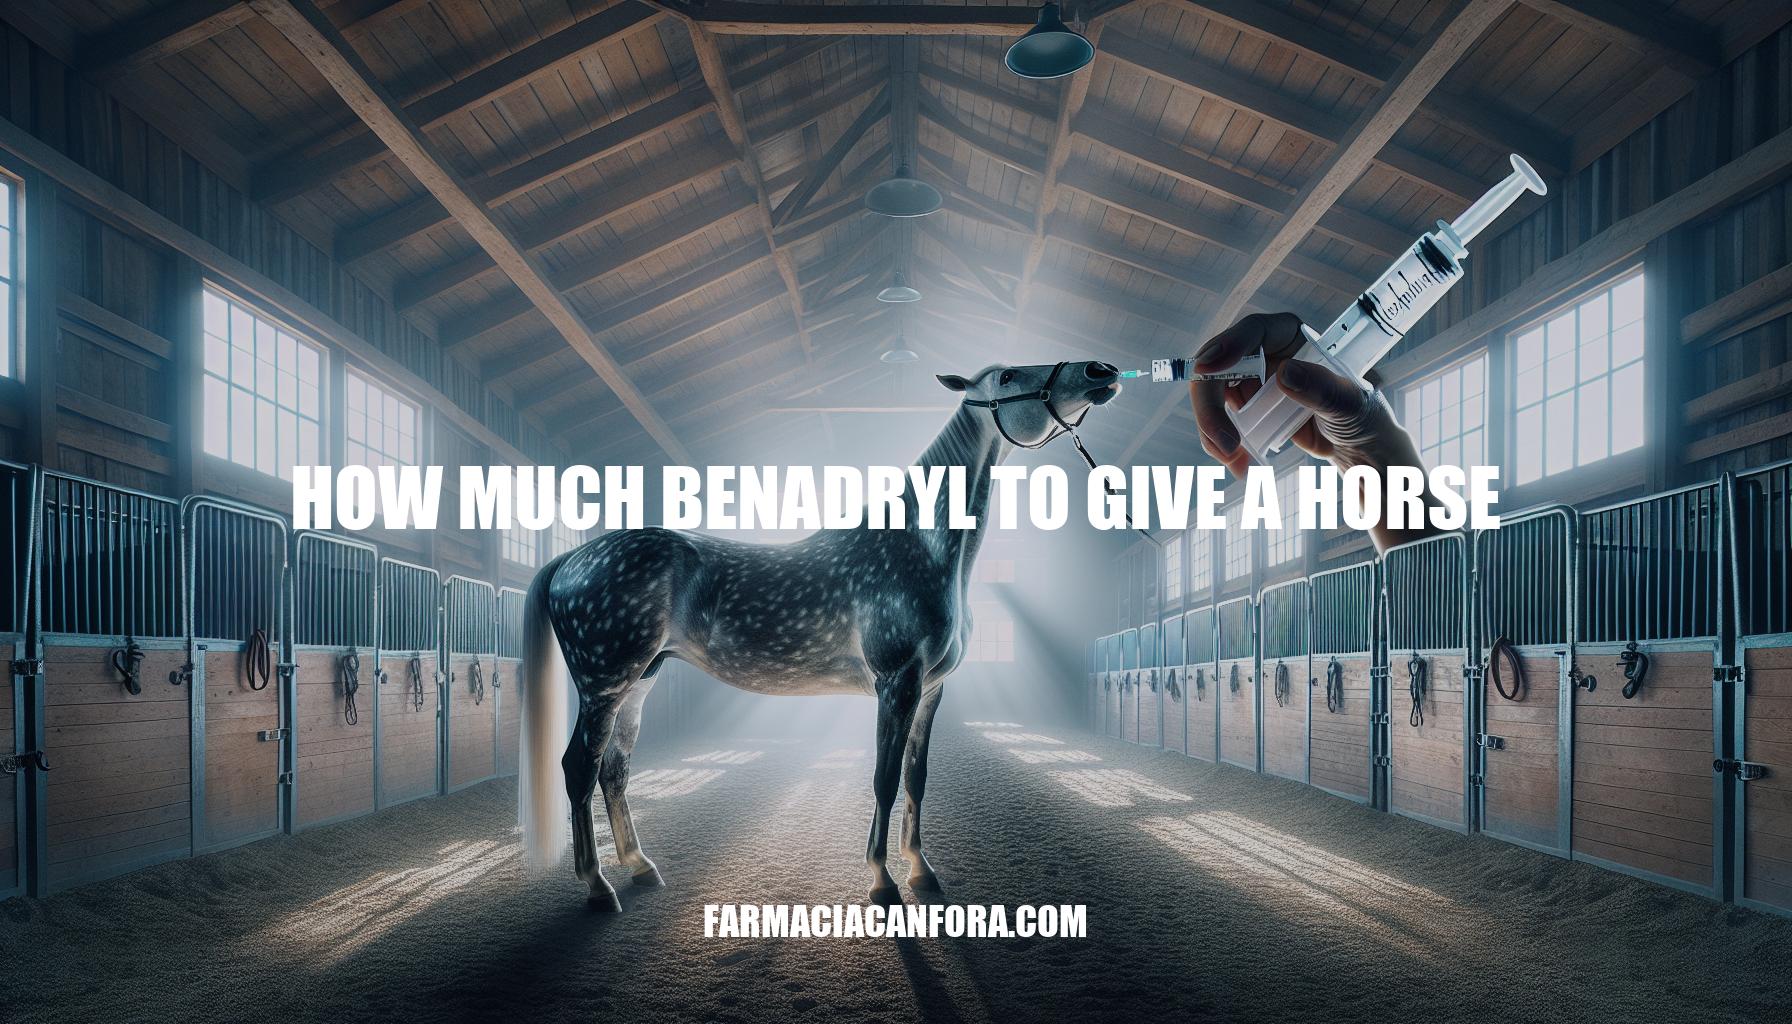 How Much Benadryl to Give a Horse: Dosage Guidelines and Administration Tips